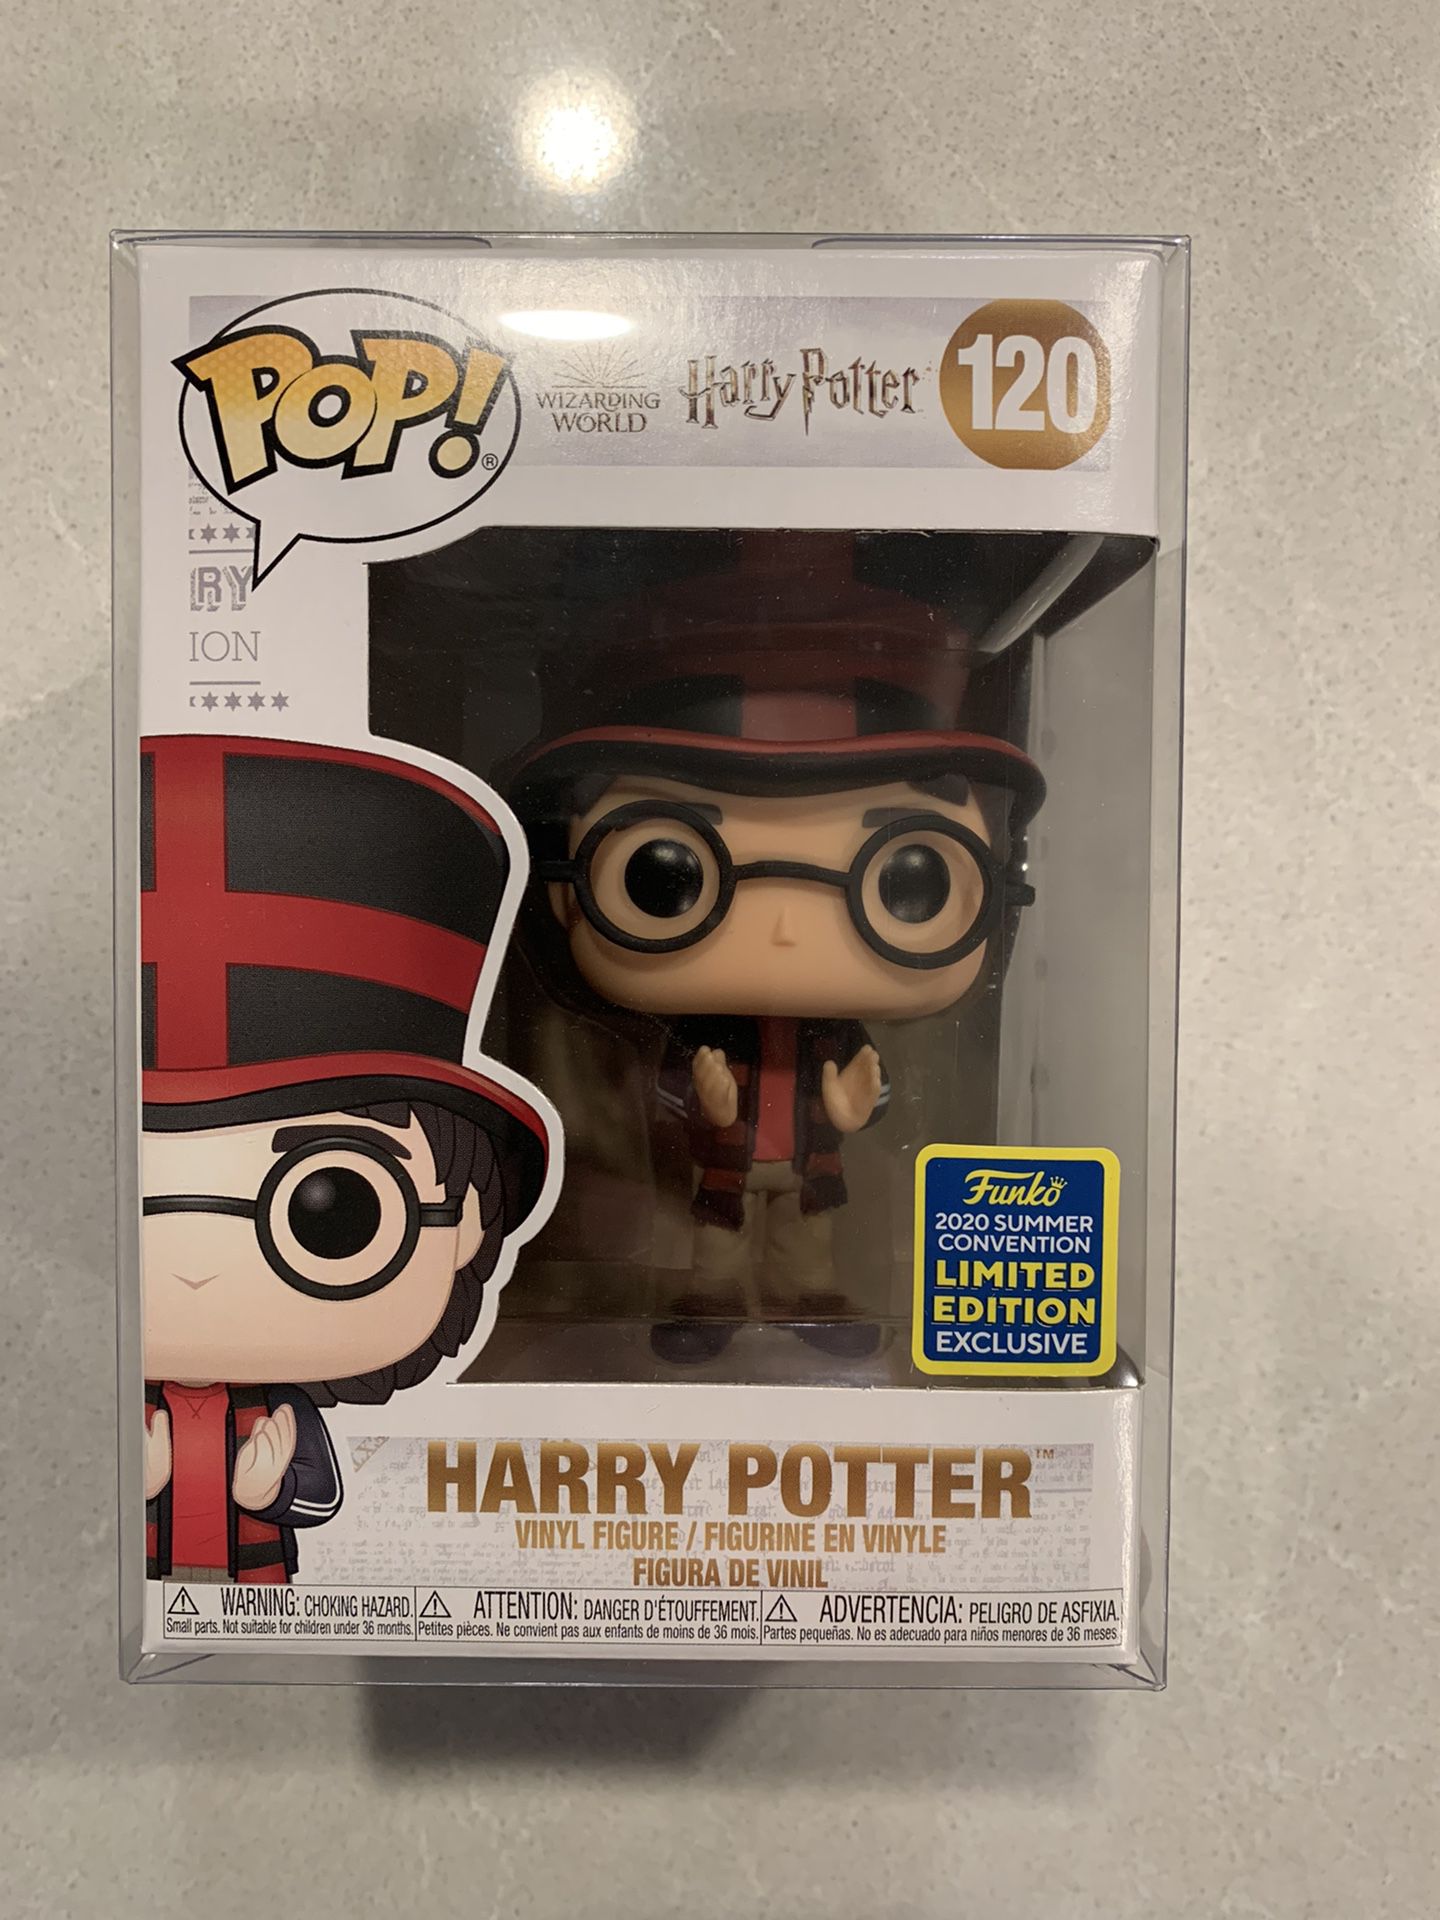 Harry Potter World Cup Funko Pop *MINT* 2020 SDCC Convention Exclusive England/UK Wizarding World 120 with protector